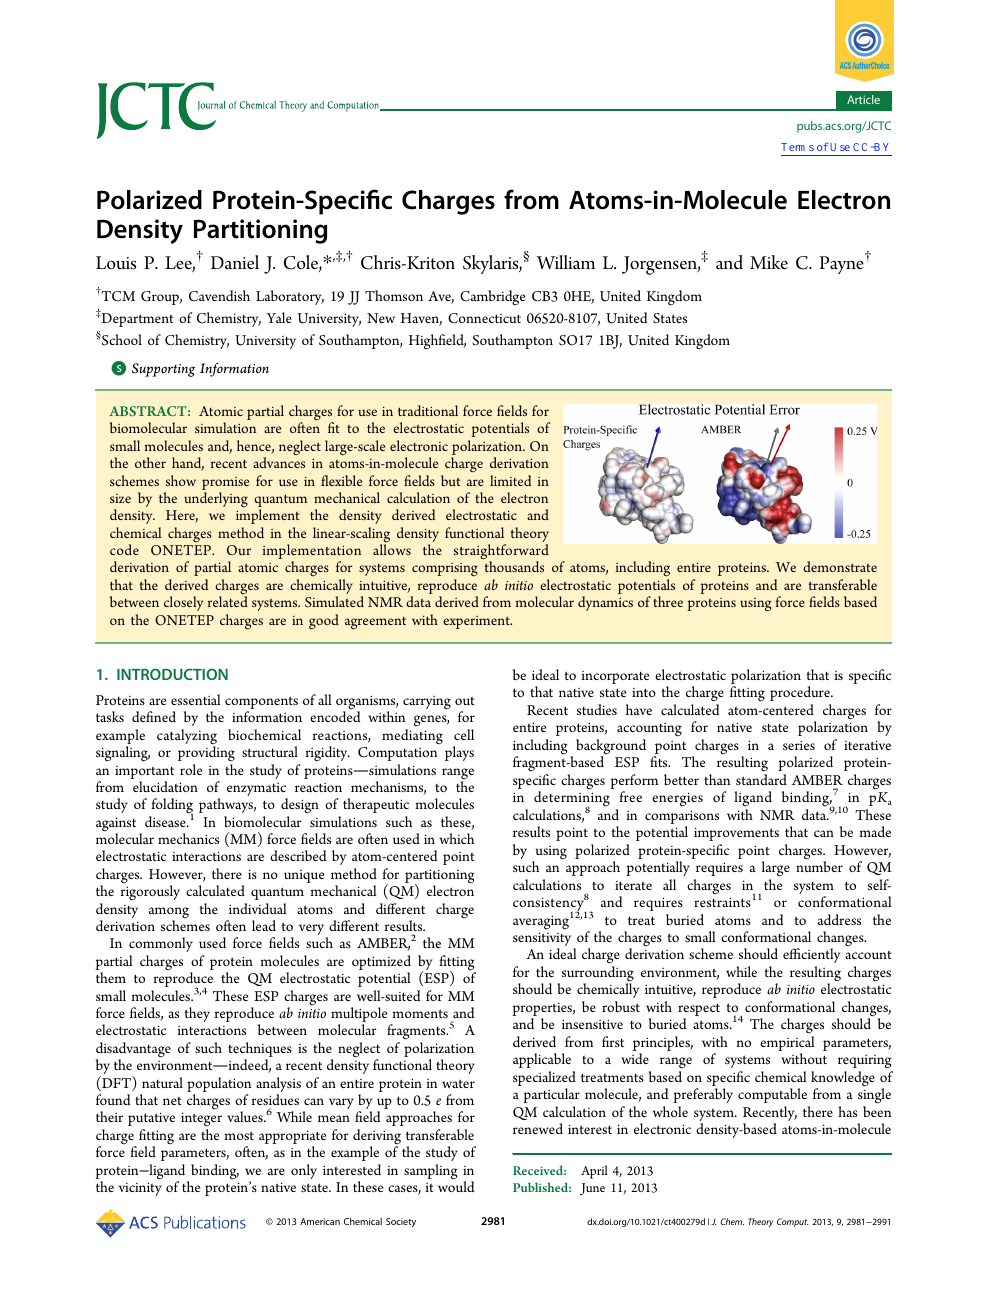 Polarized Protein Specific Charges From Atoms In Molecule Electron Density Partitioning Topic Of Research Paper In Nano Technology Download Scholarly Article Pdf And Read For Free On Cyberleninka Open Science Hub